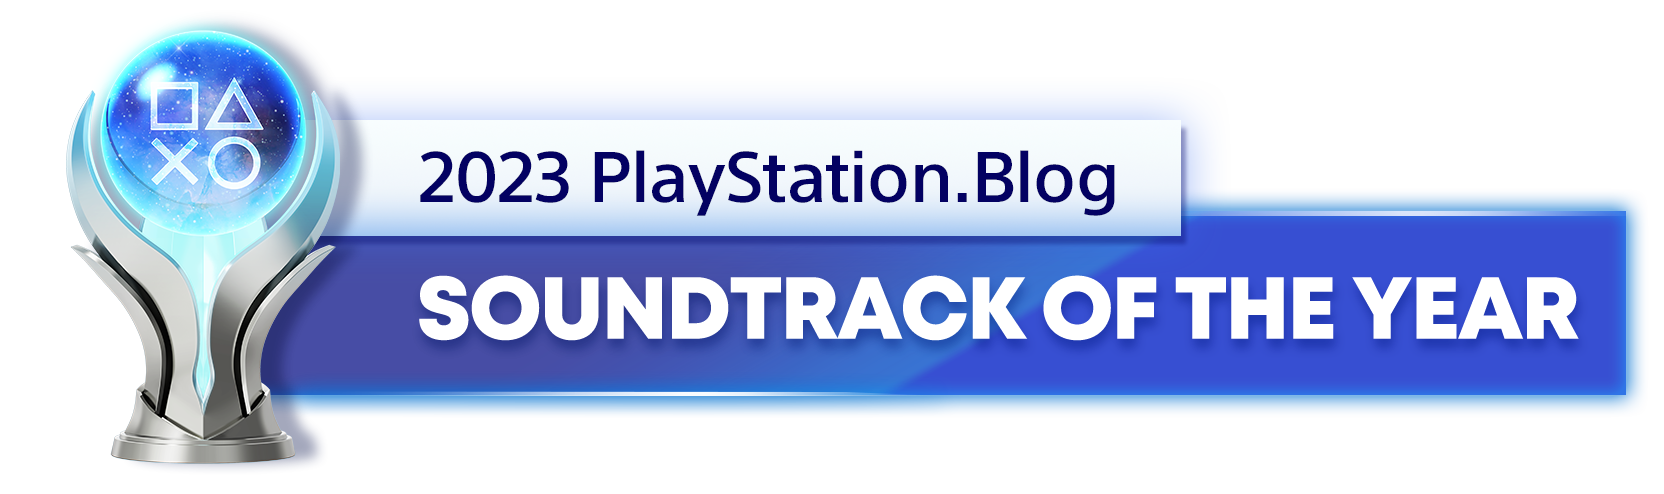  "Platinum Trophy for the 2023 PlayStation Blog Soundtrack of the Year Winner"